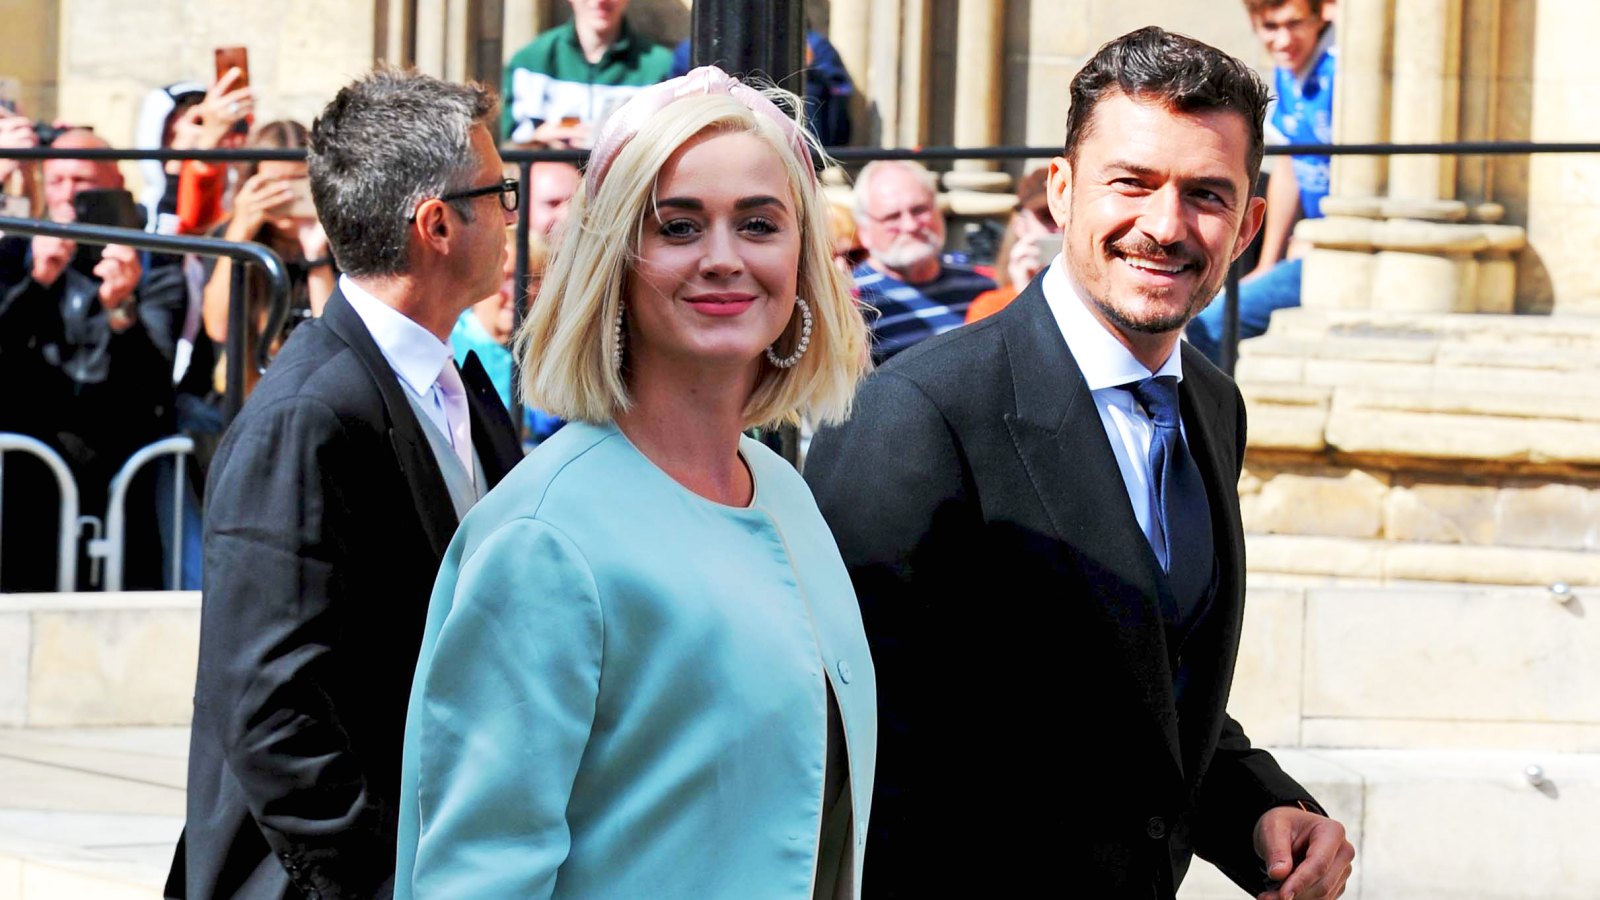 Orlando Bloom Gushes About Katy Perry Pregnancy: ‘My Babies Blooming’